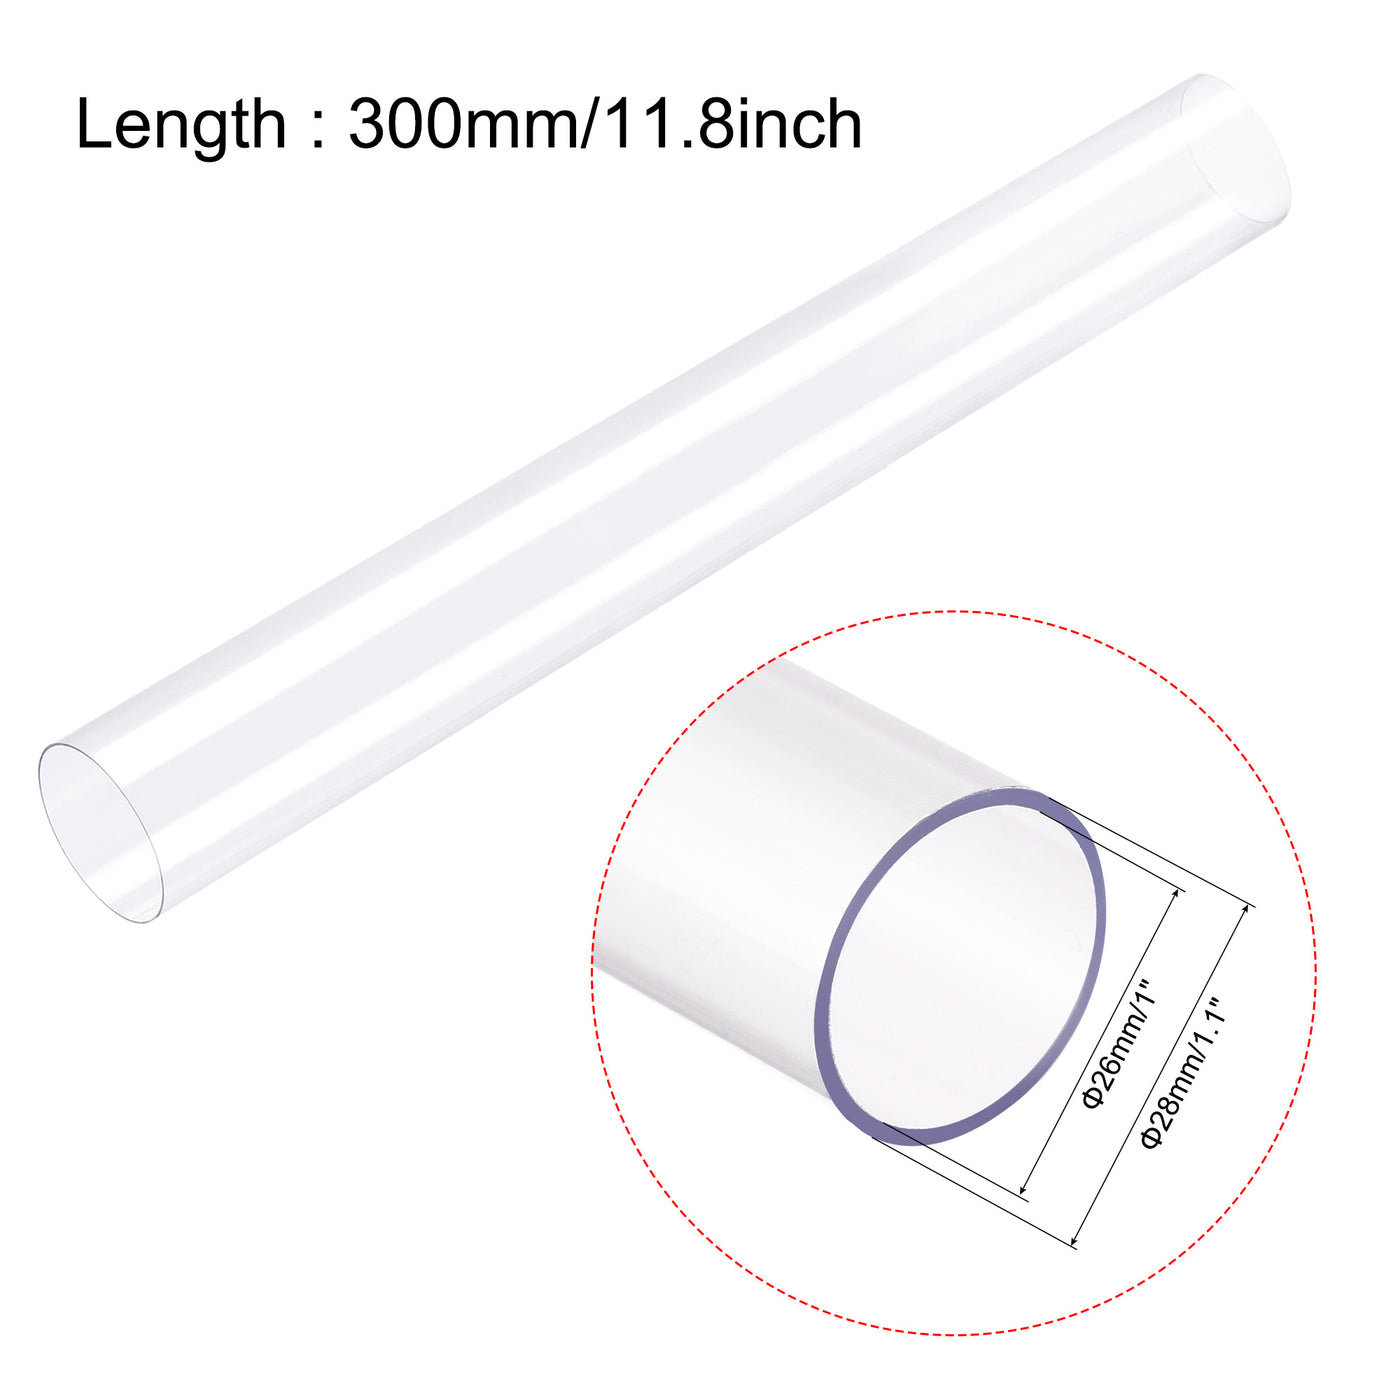 uxcell Uxcell Polycarbonate Rigid Round Clear Tubing 26mm(1 Inch)IDx28mm(1.1 Inch)ODx300mm(11.8 Inch) Length Plastic Storage Transparent Tube with White Lids